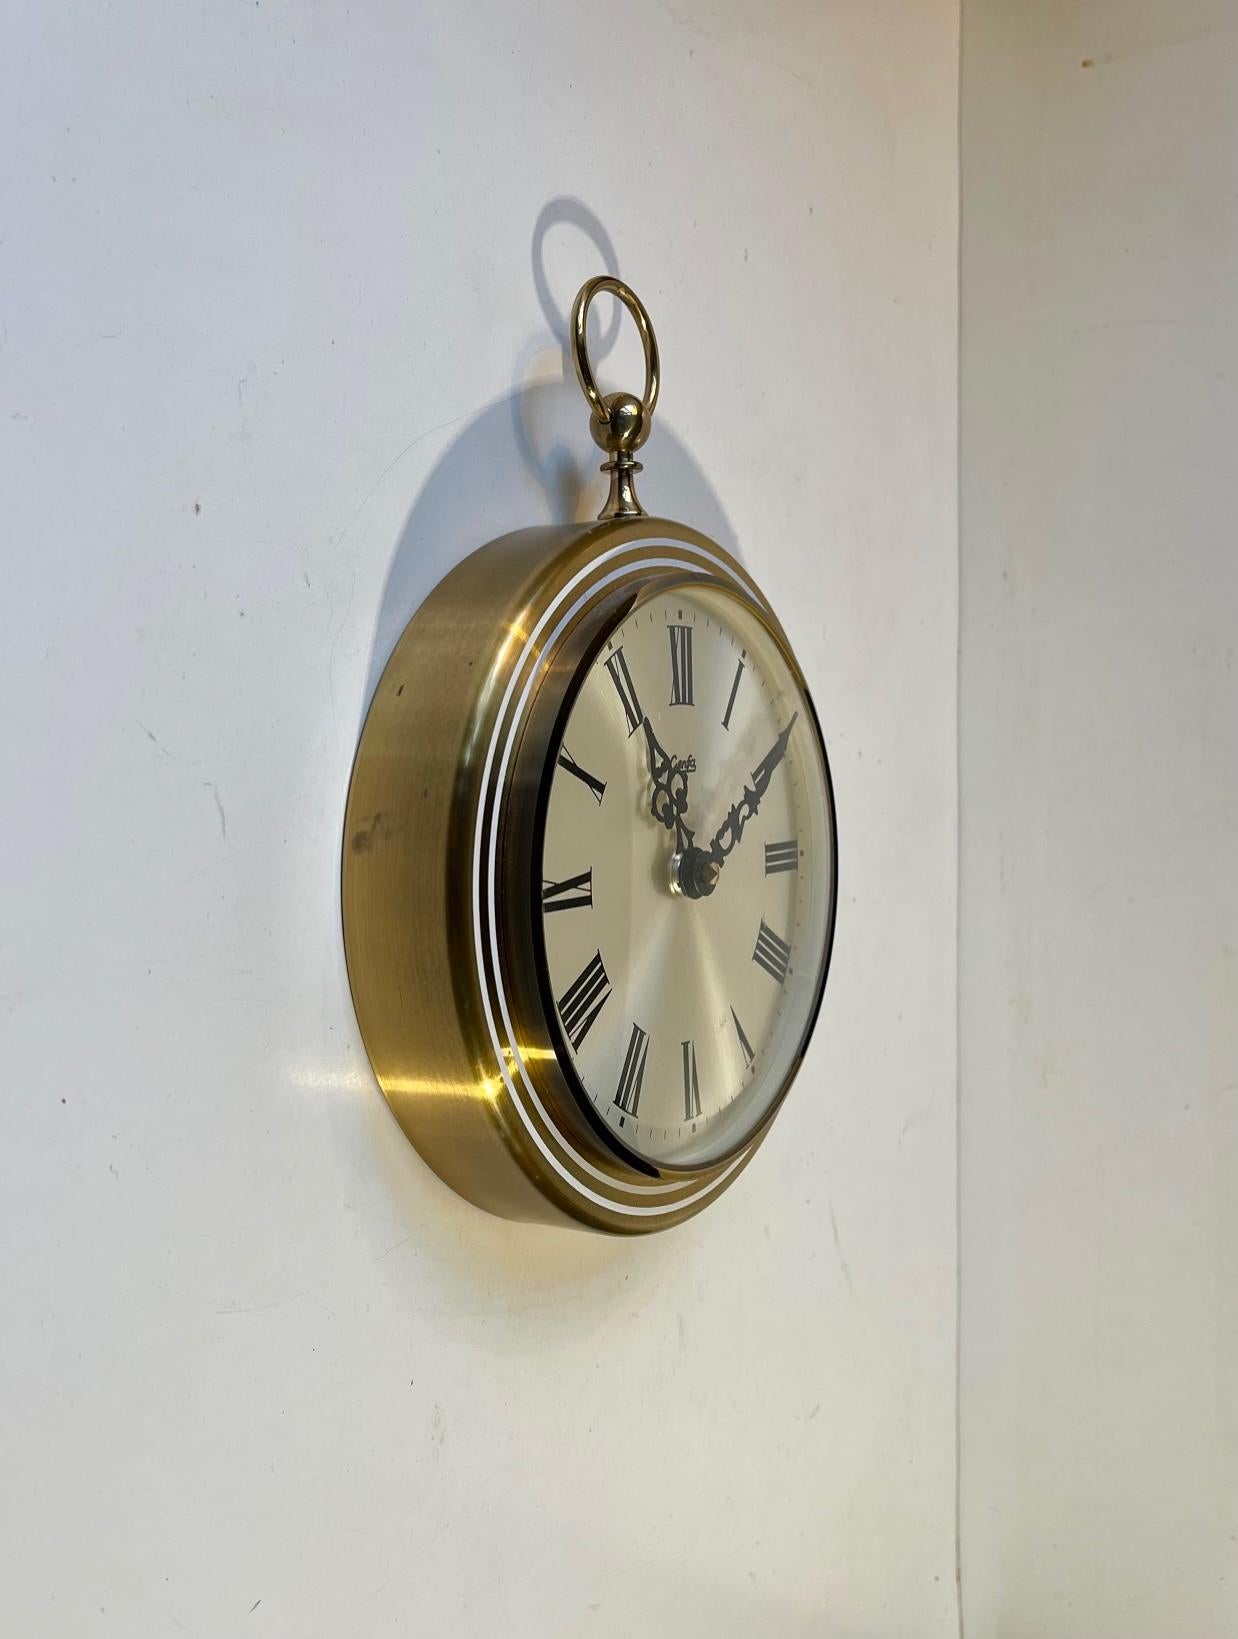 A pocket watch shaped quartz (batteri-operated) wall clock featuring solid brass frame, Roman numerals and a sunburst dial in silver enamel. Manufactured by Genfa in Germany circa 1970-80. Measurements: H: 24.5, Diameter: 18.5 cm.